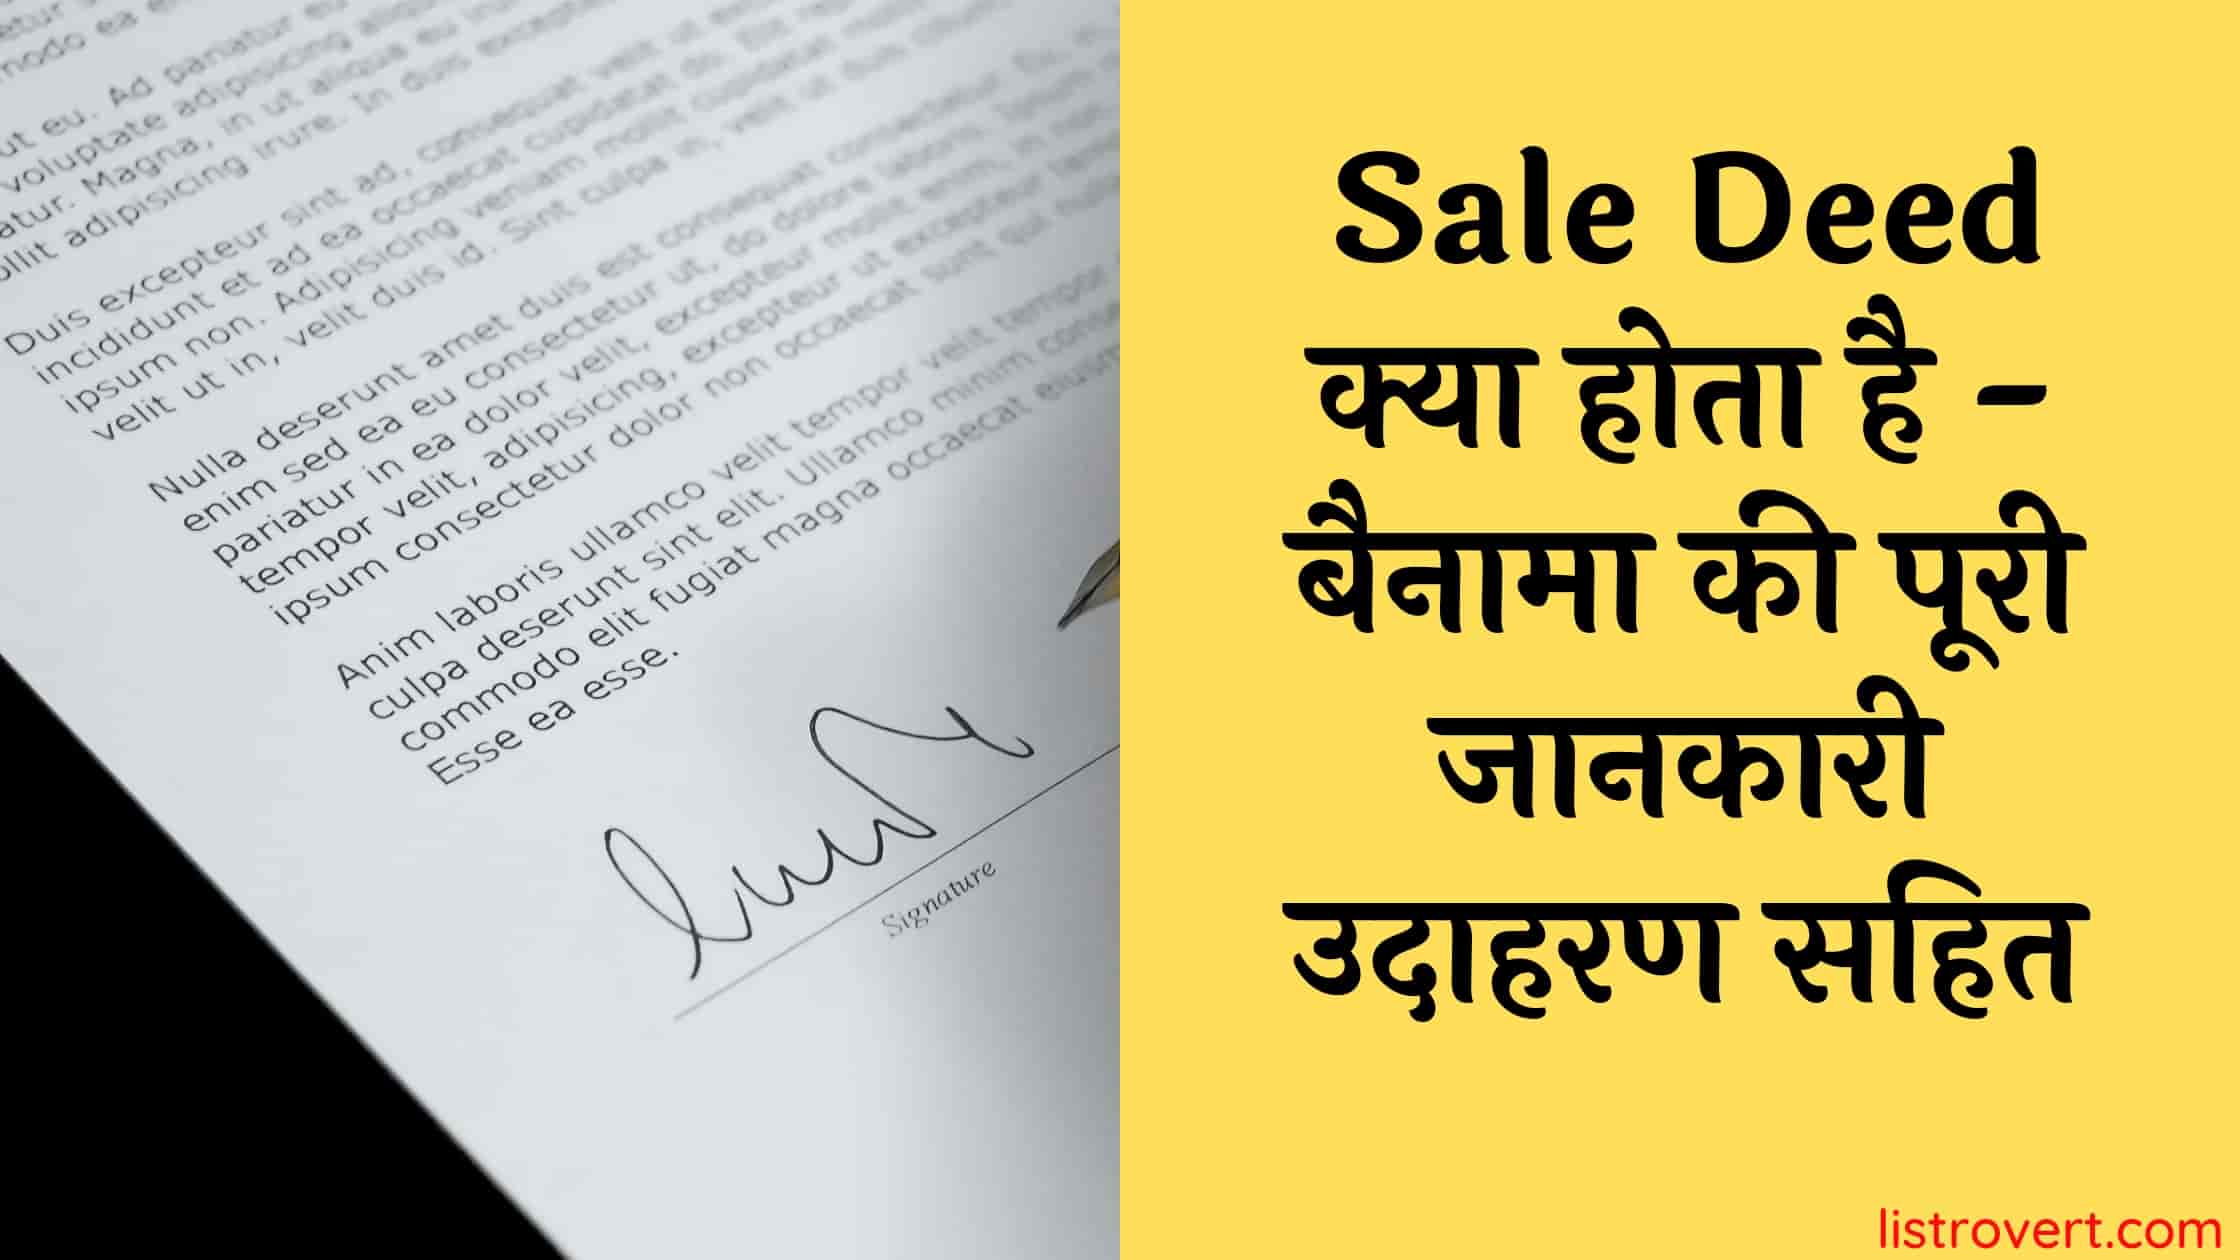 Sale Deed meaning in Hindi